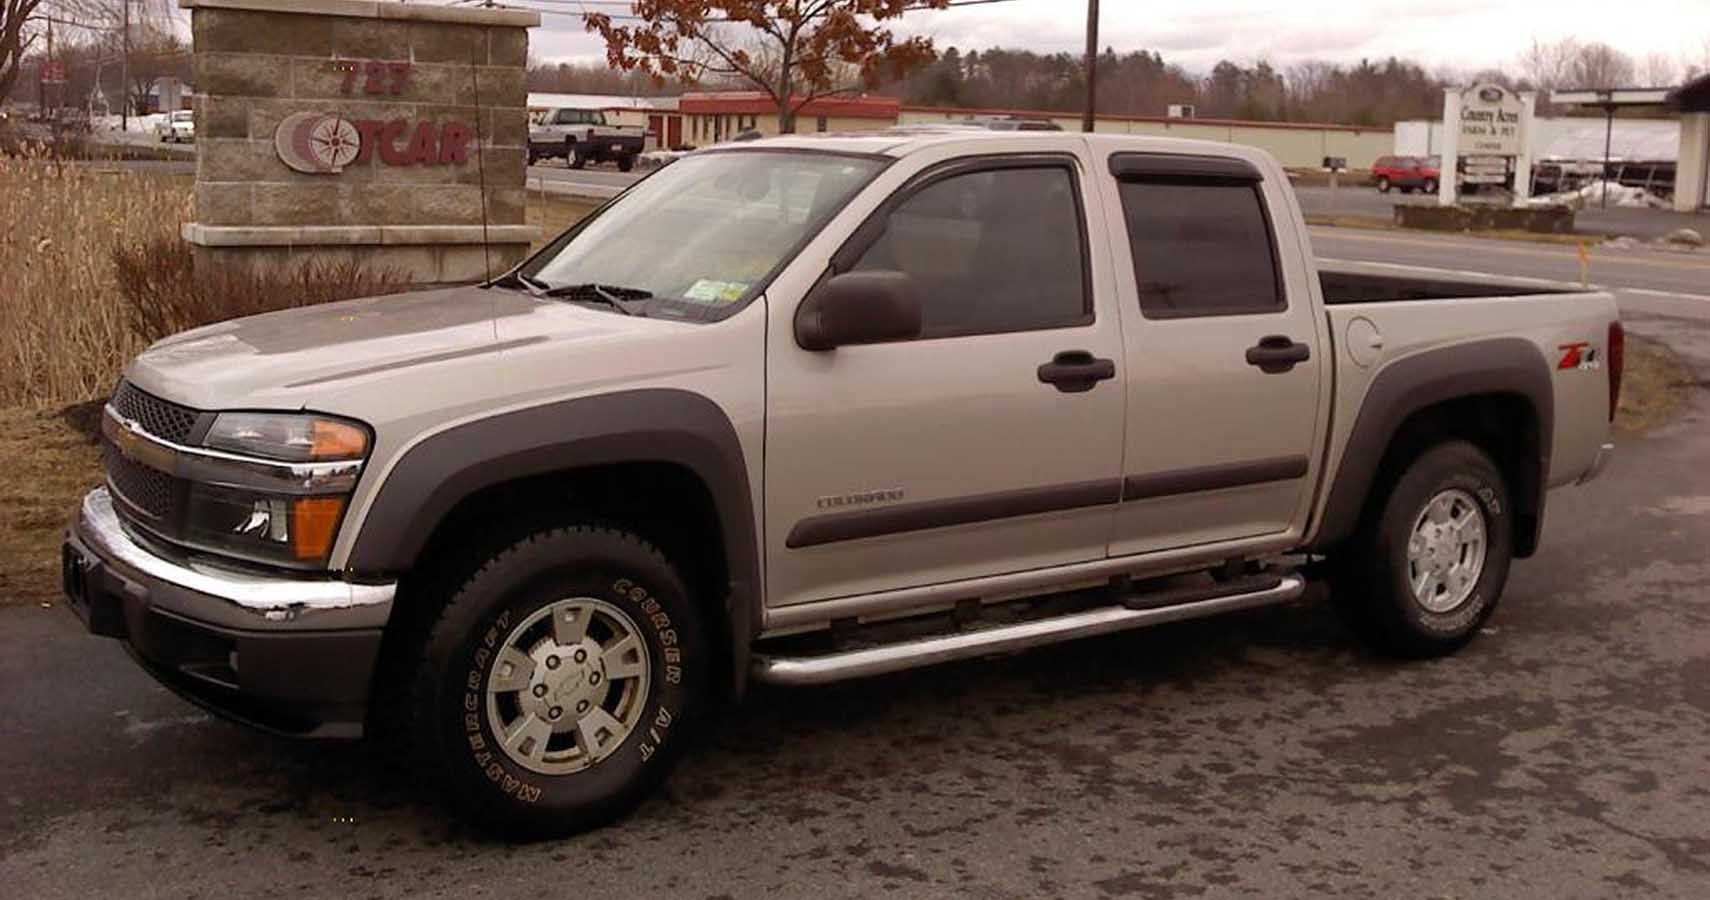 The Worst Years Of Chevrolet Colorado Are 2004, 2005, 2008, & 2015